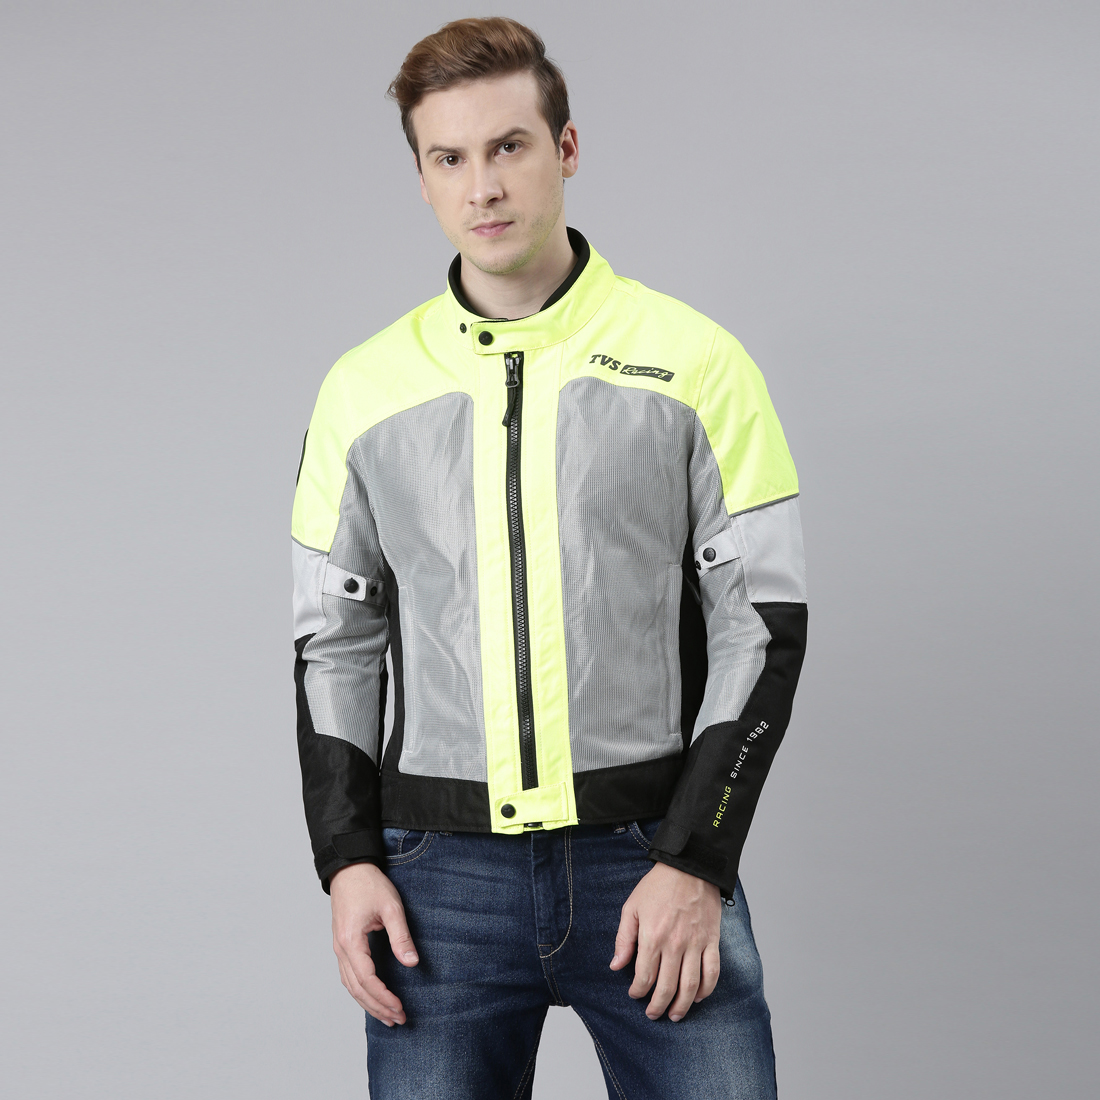  TVS Racing Street Striker Riding Jacket for Men- High Abrasion 600D Polyester, CE Level 2 Armour Protection – Essential Bike Jacket for Bikers (Neon)